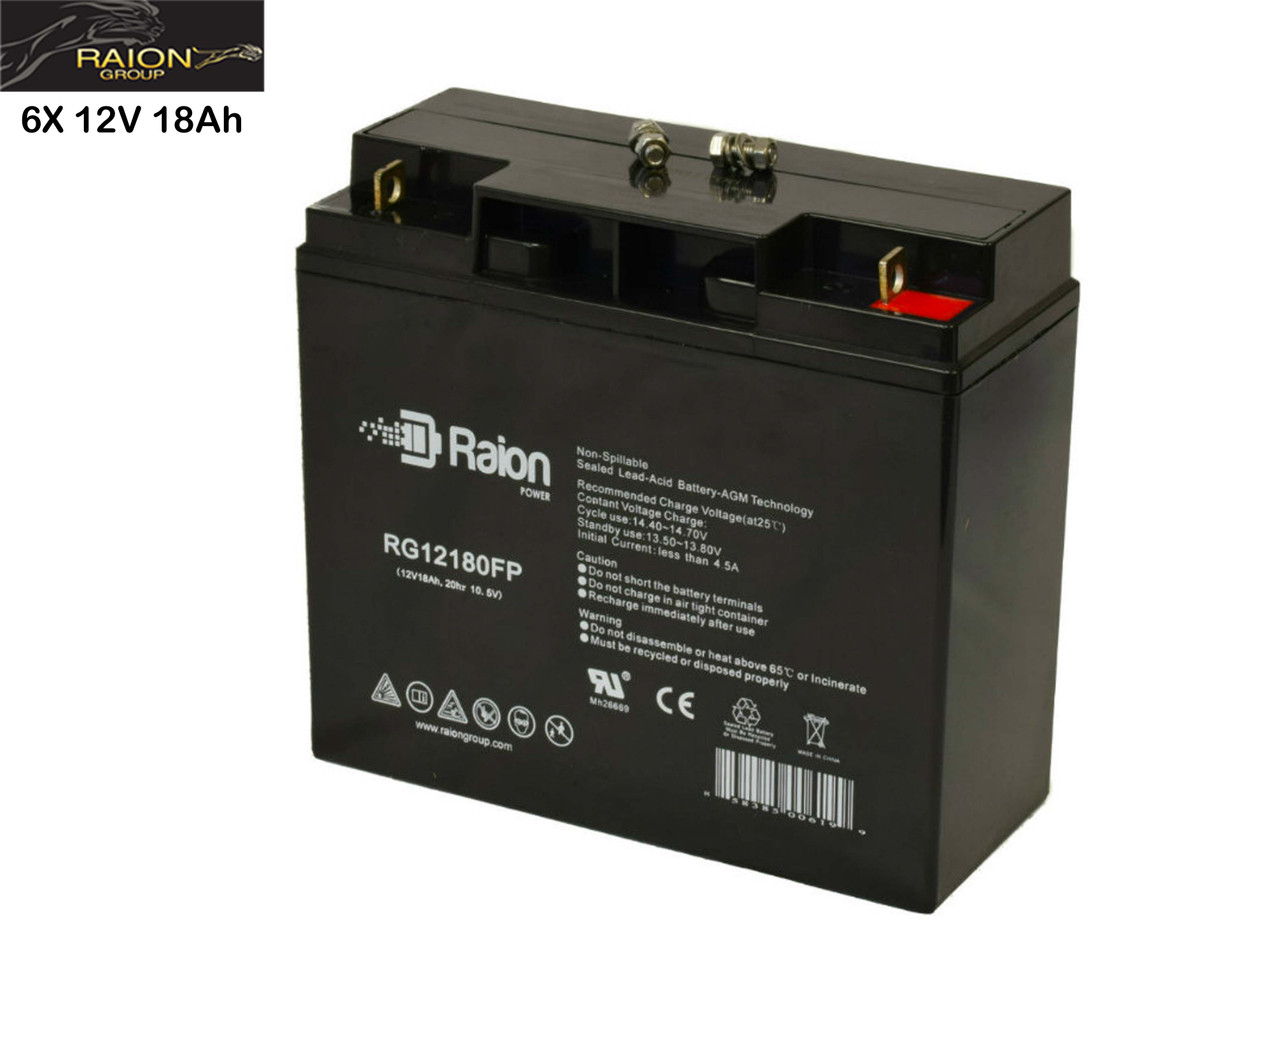 Raion Power Replacement 12V 18Ah Battery for Daymak Eagle - 6 Pack